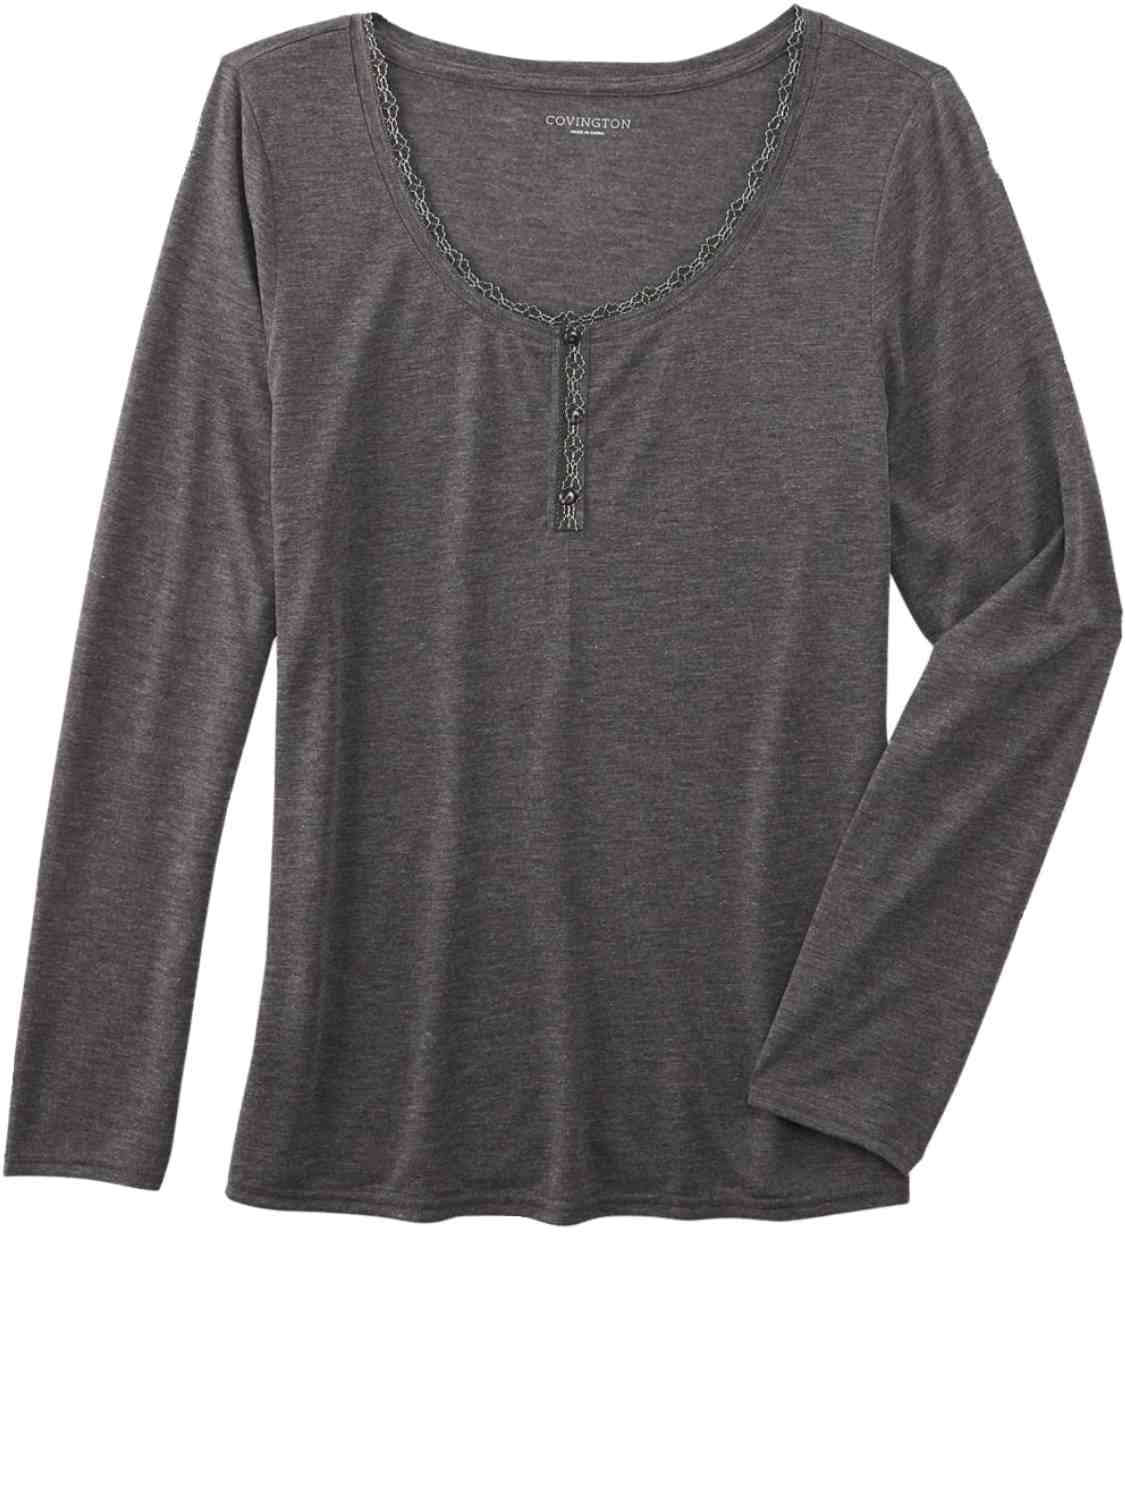 Covington - Womens Heather Gray Knit T-Shirt Long Sleeved Floral ...